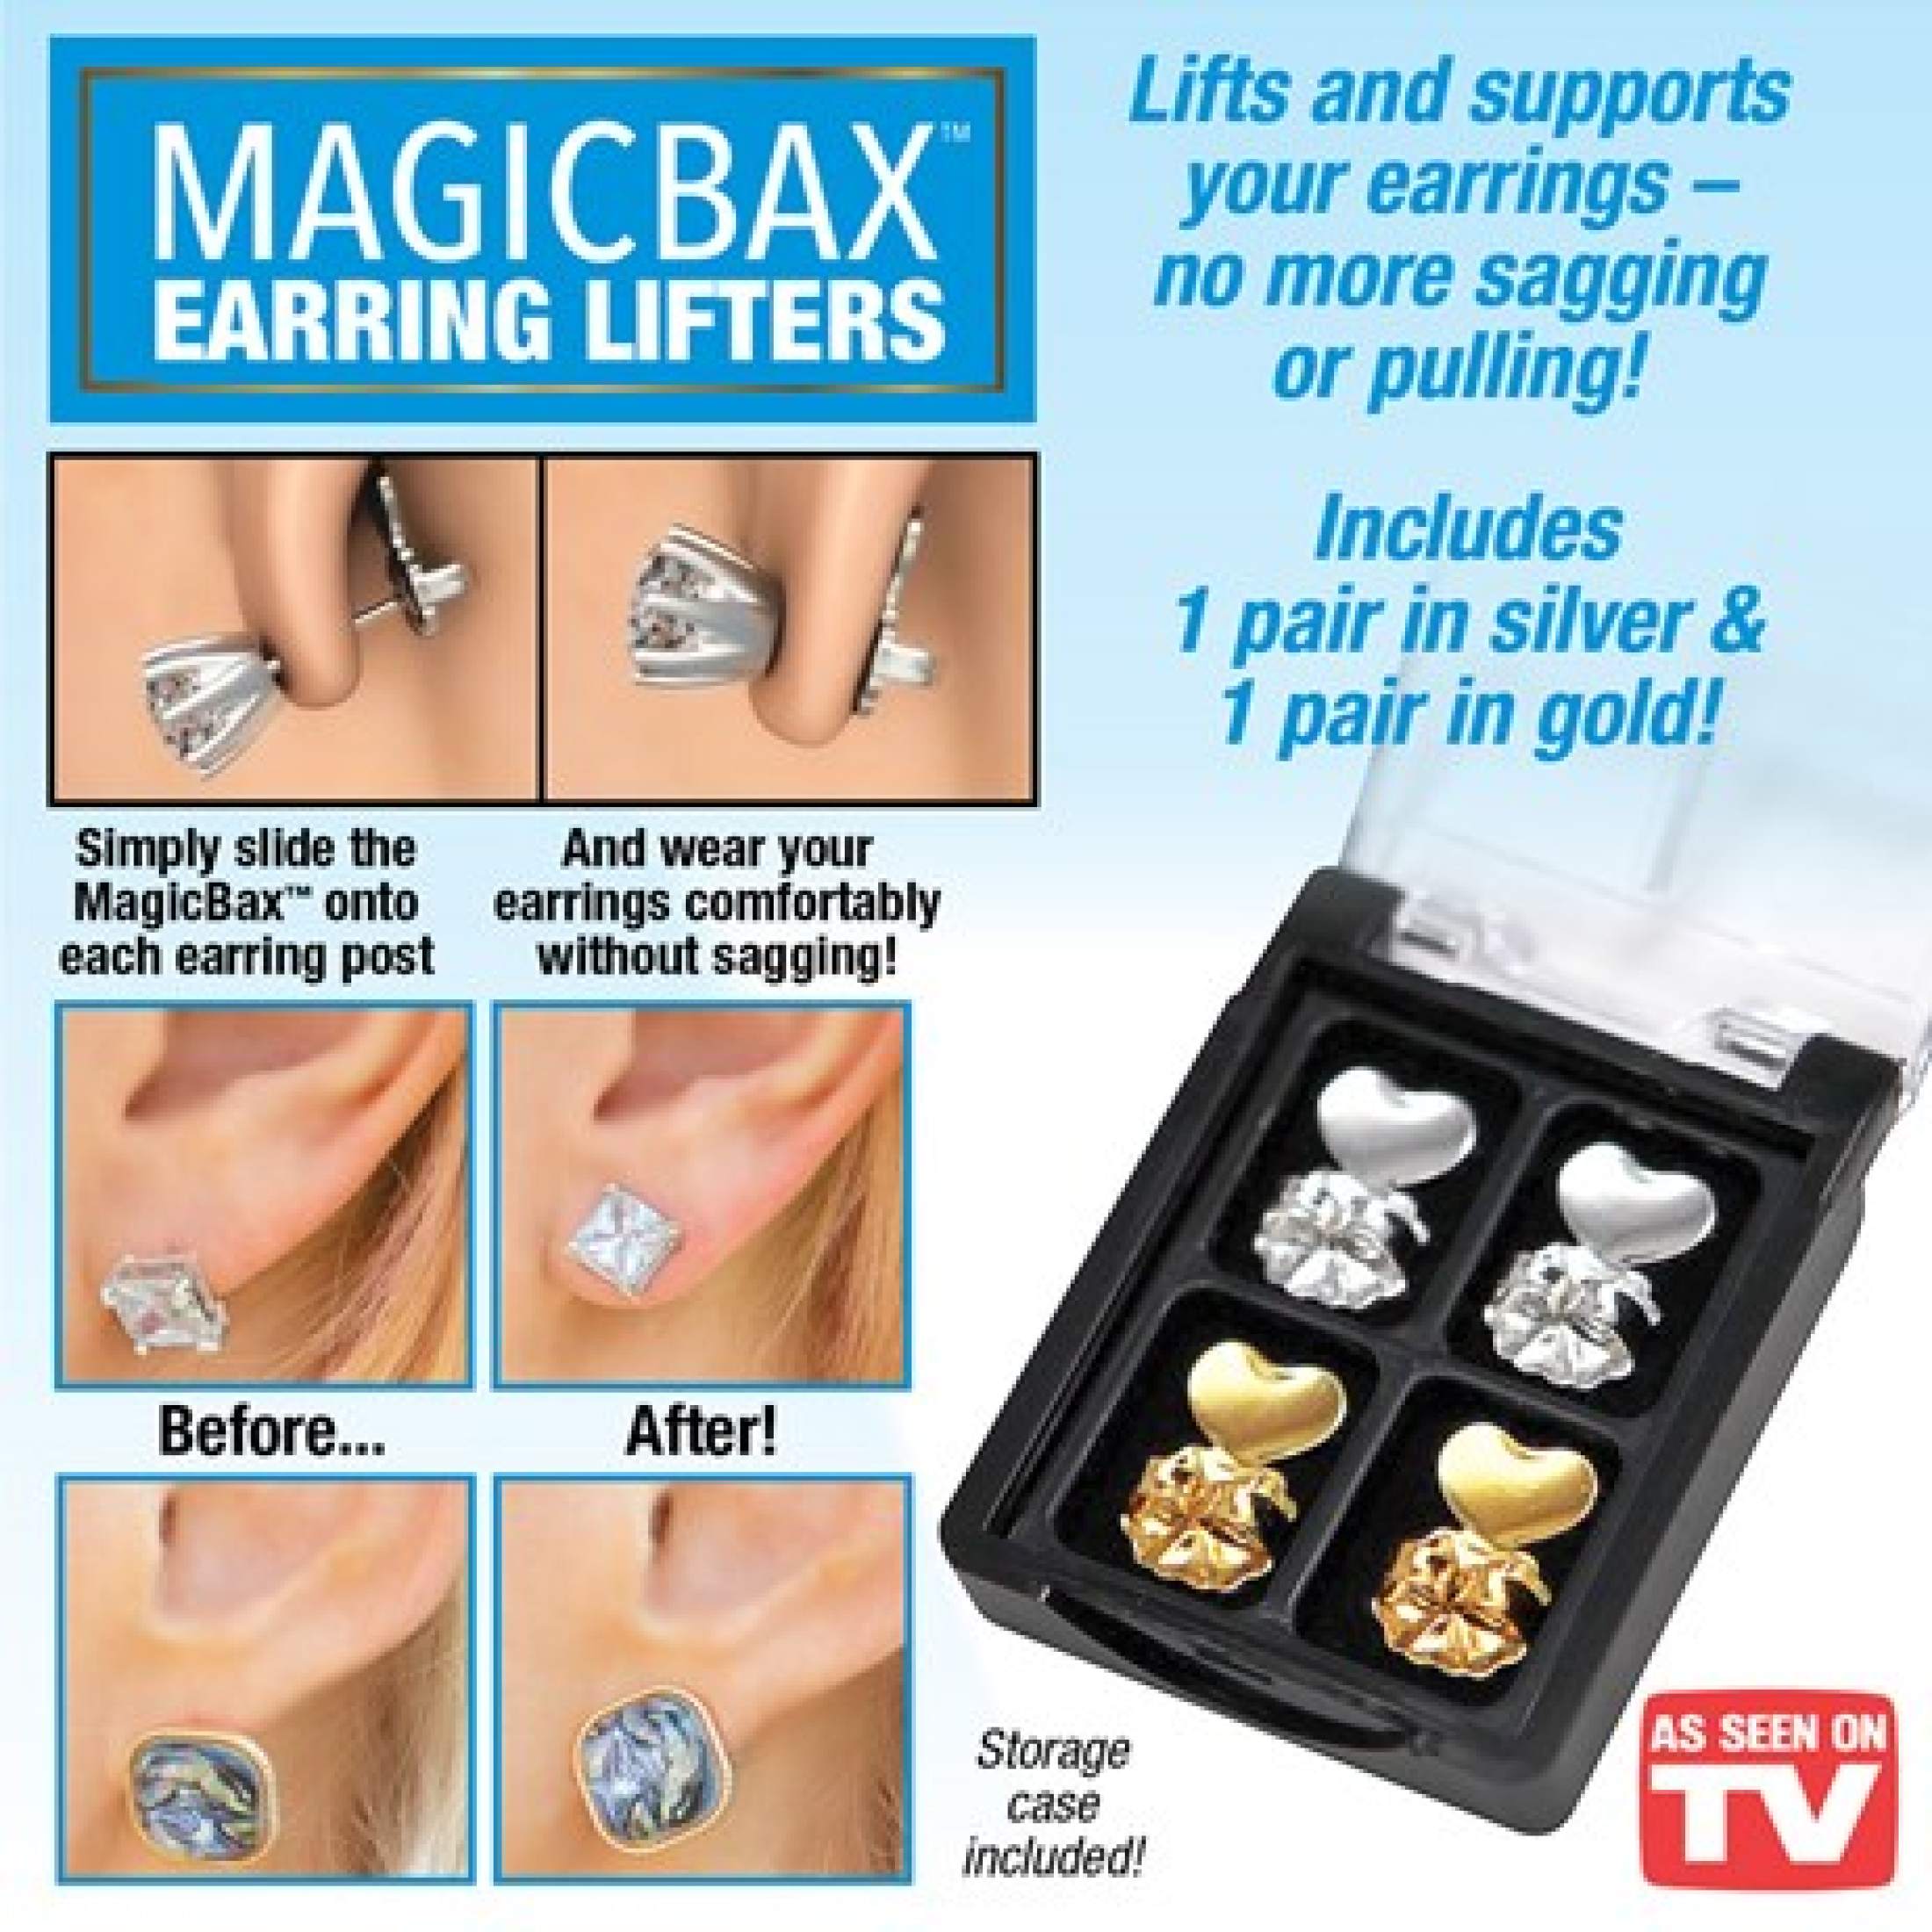 Magic Bax Earring Lifters - 2 Pairs of Adjustable Hypoallergenic Earring  Lifts - As Seen on TV